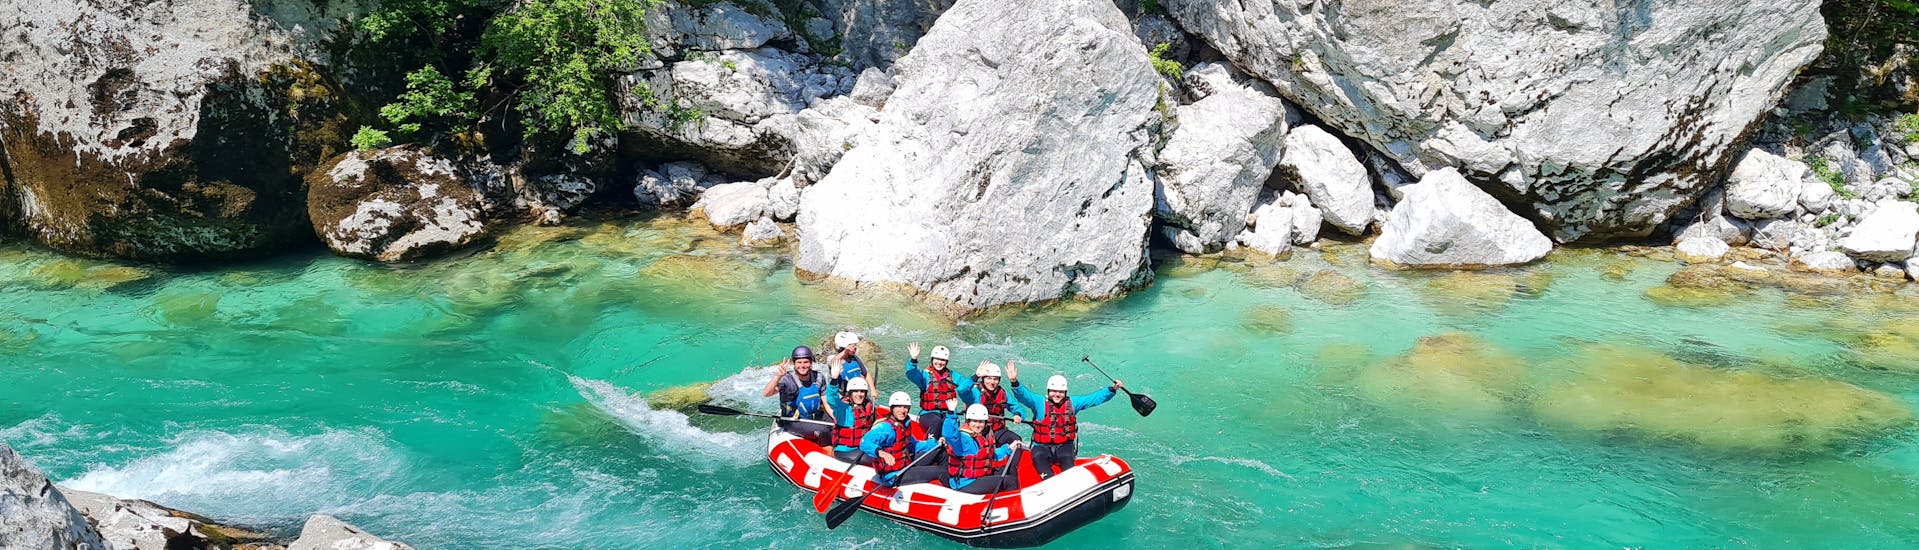 Rafting nelle rapide dell'Isonzo a Bovec.